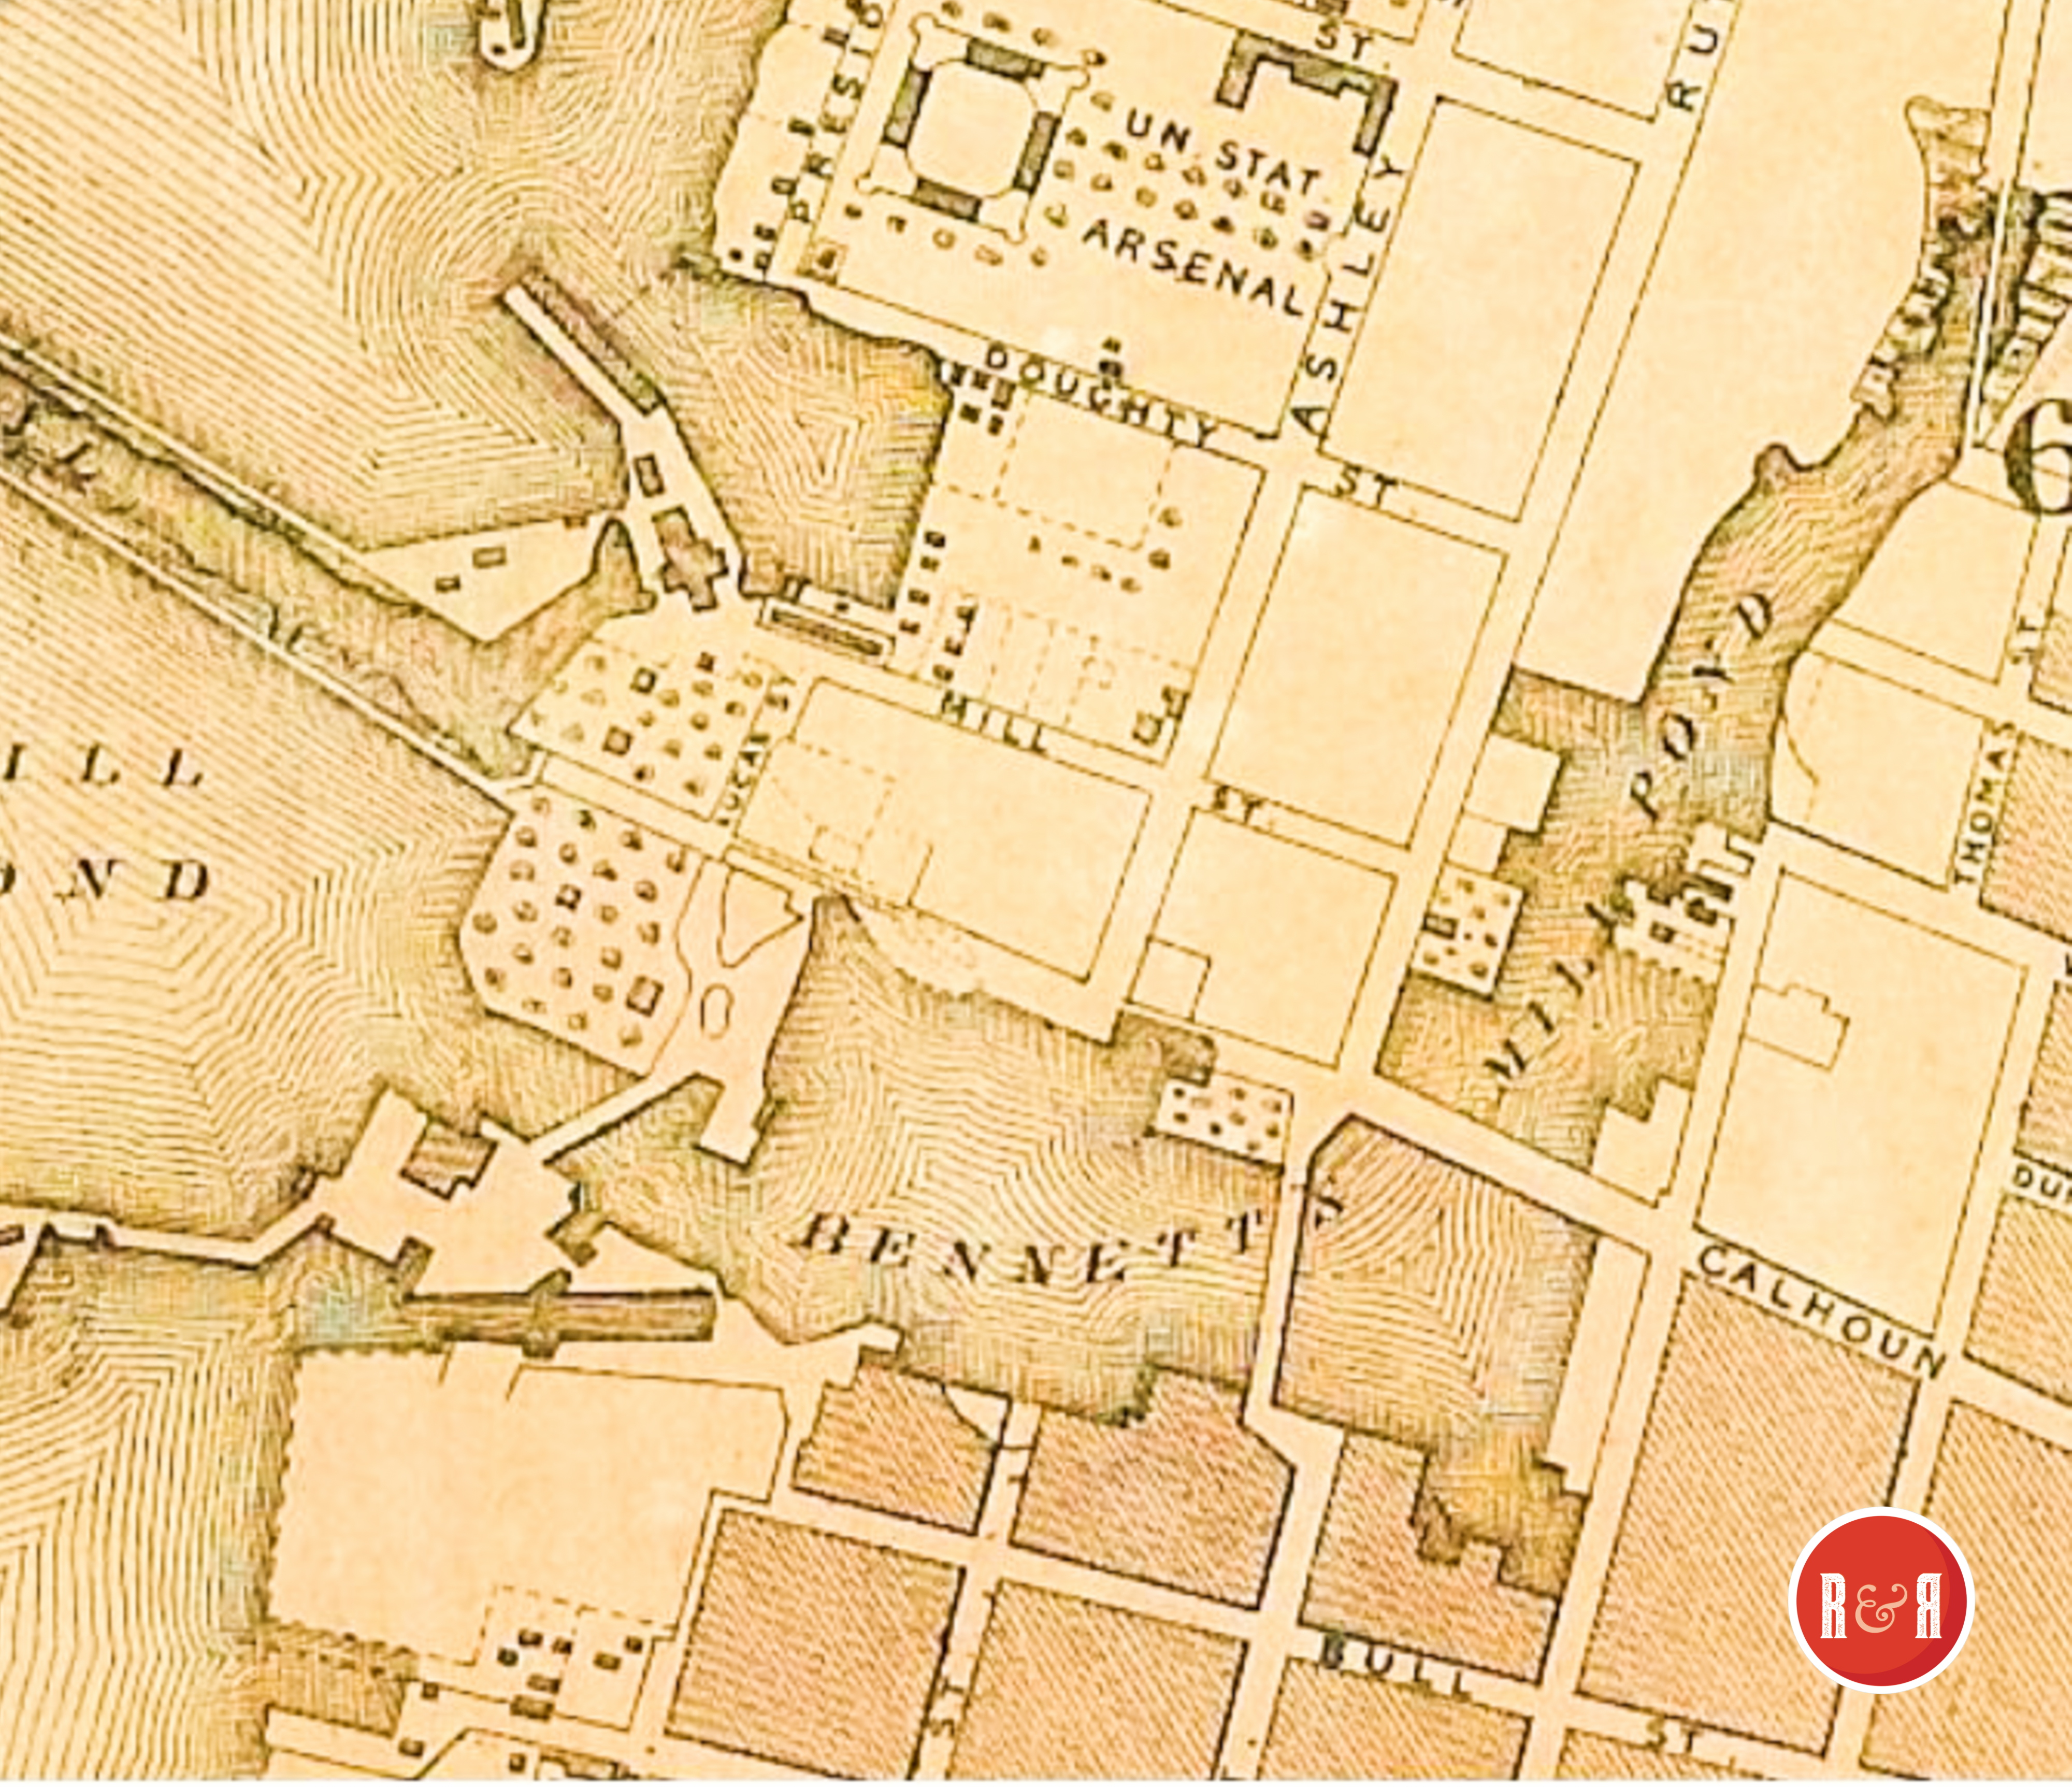 COLTON'S 1854 MAP OF BENNETT'S MILL POND